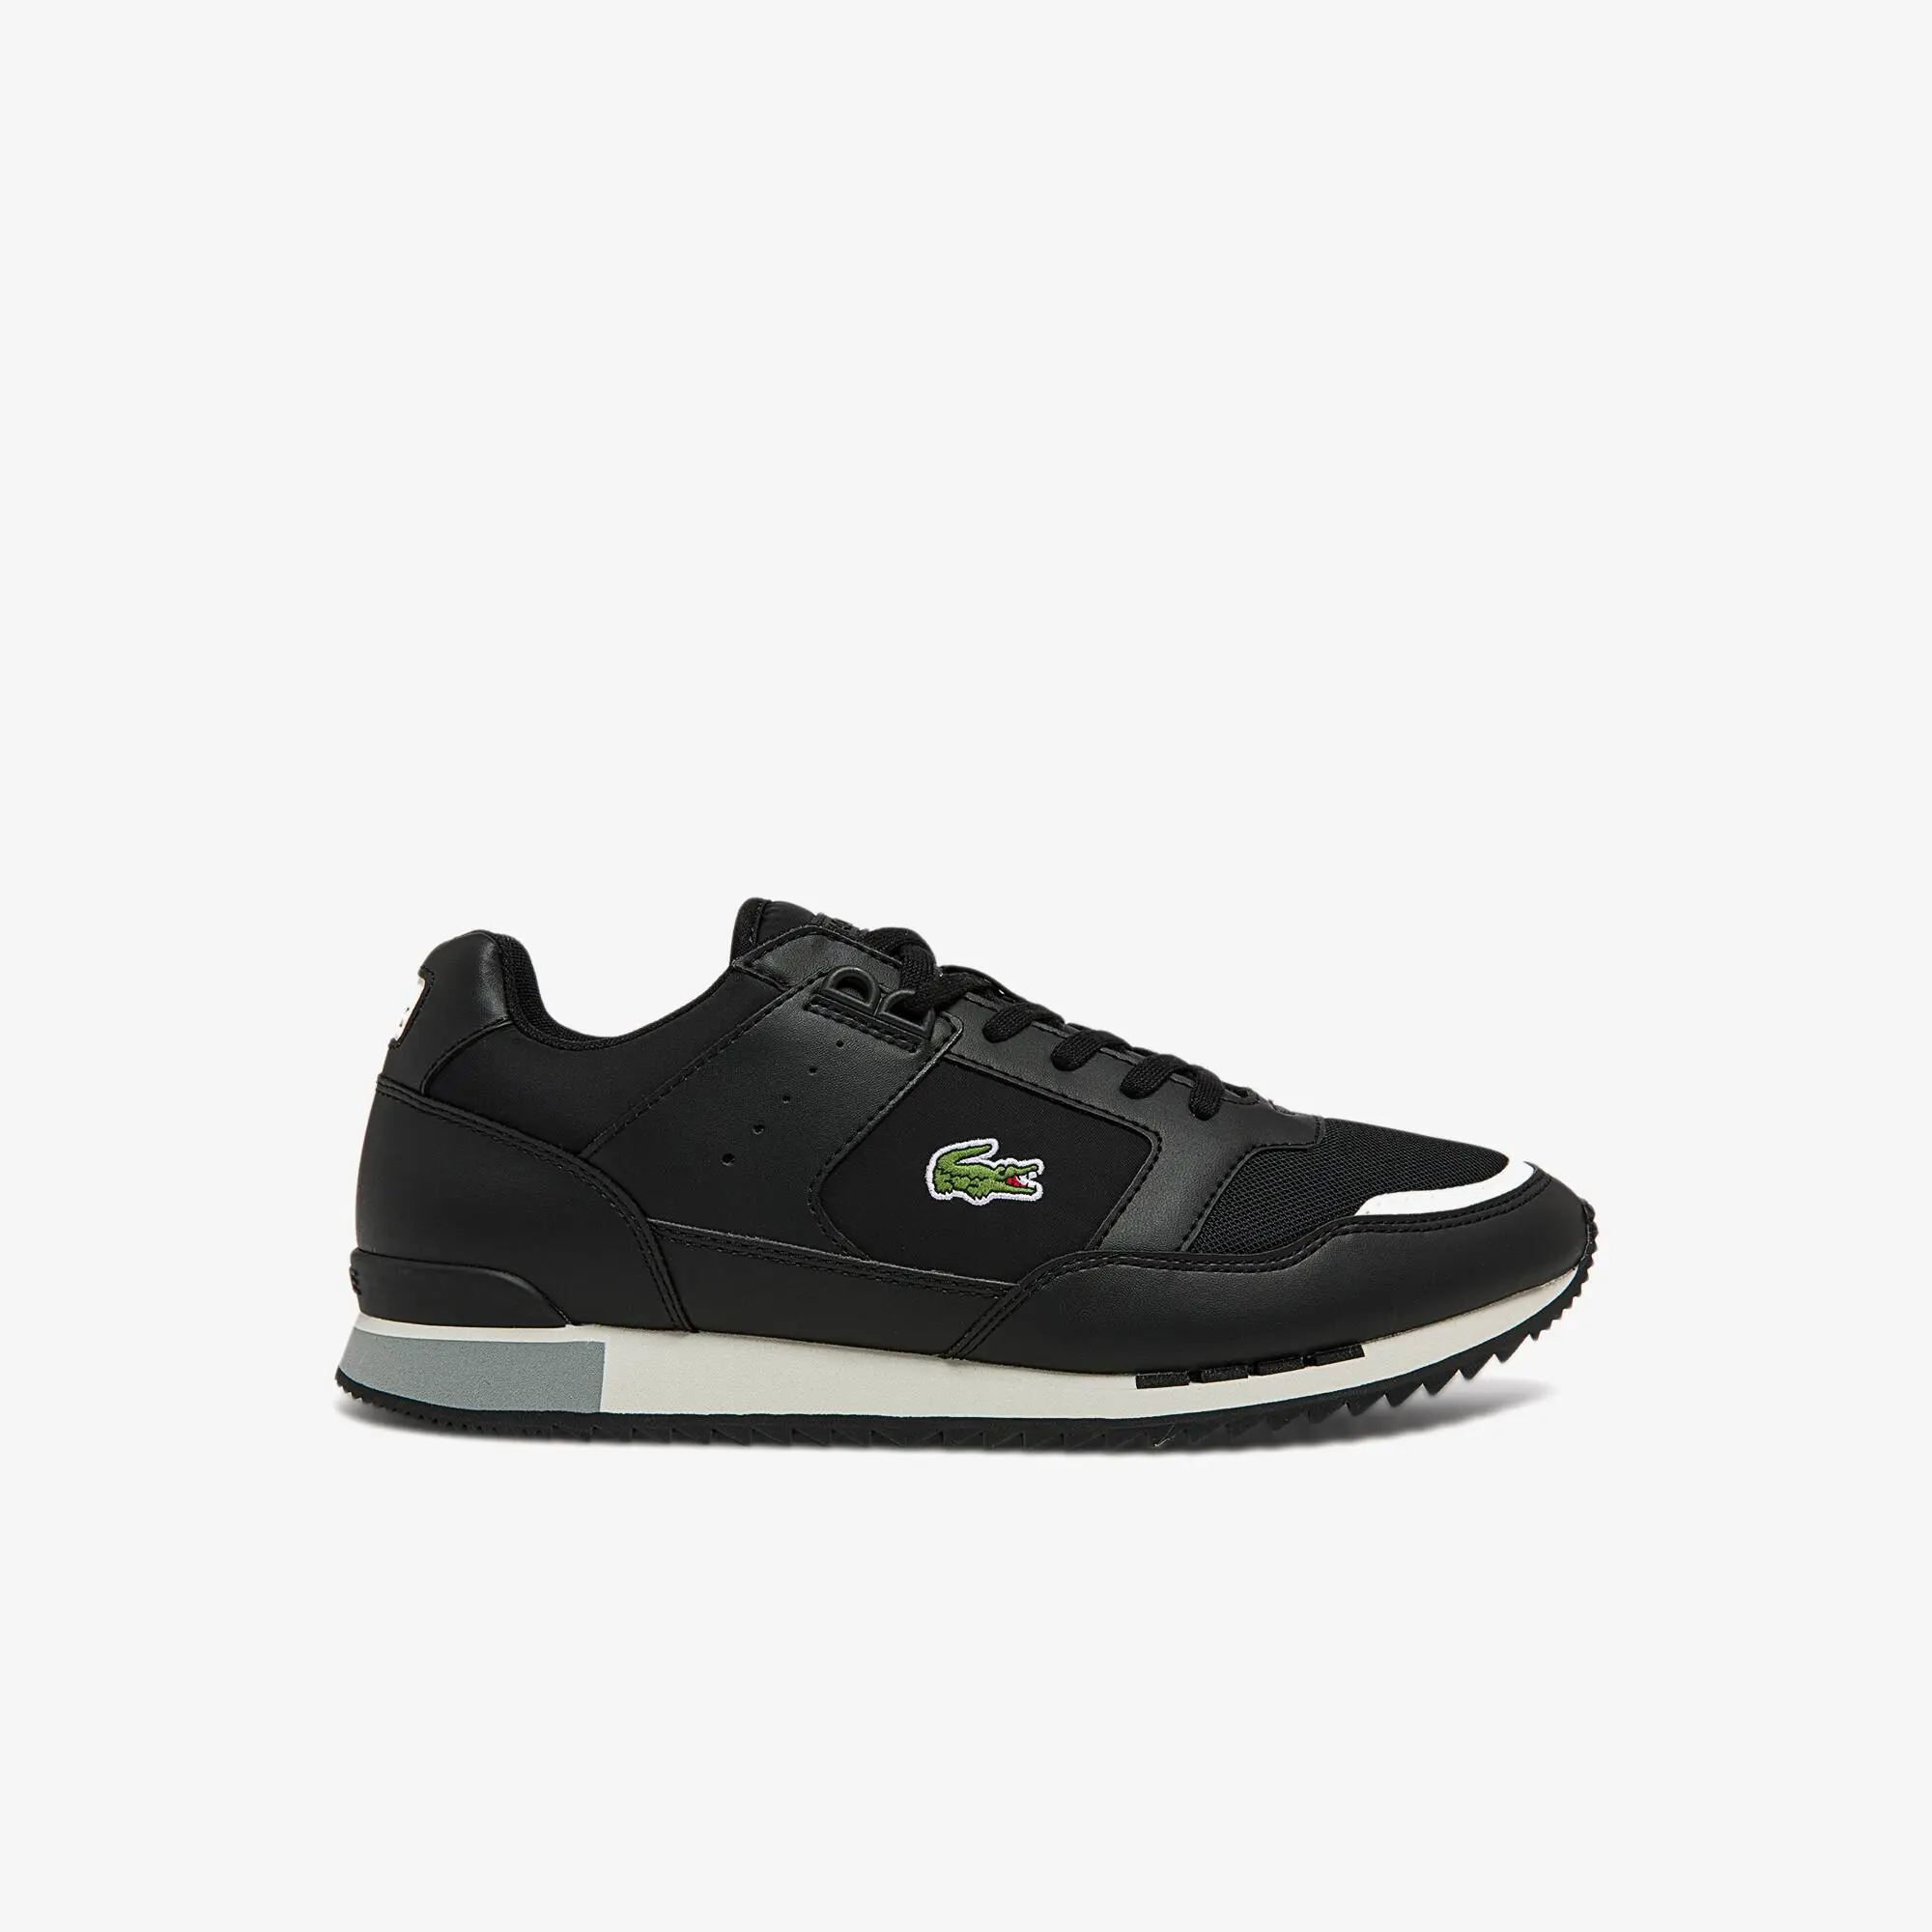 Lacoste Men's Partner Piste Synthetic and Textile Trainers. 1